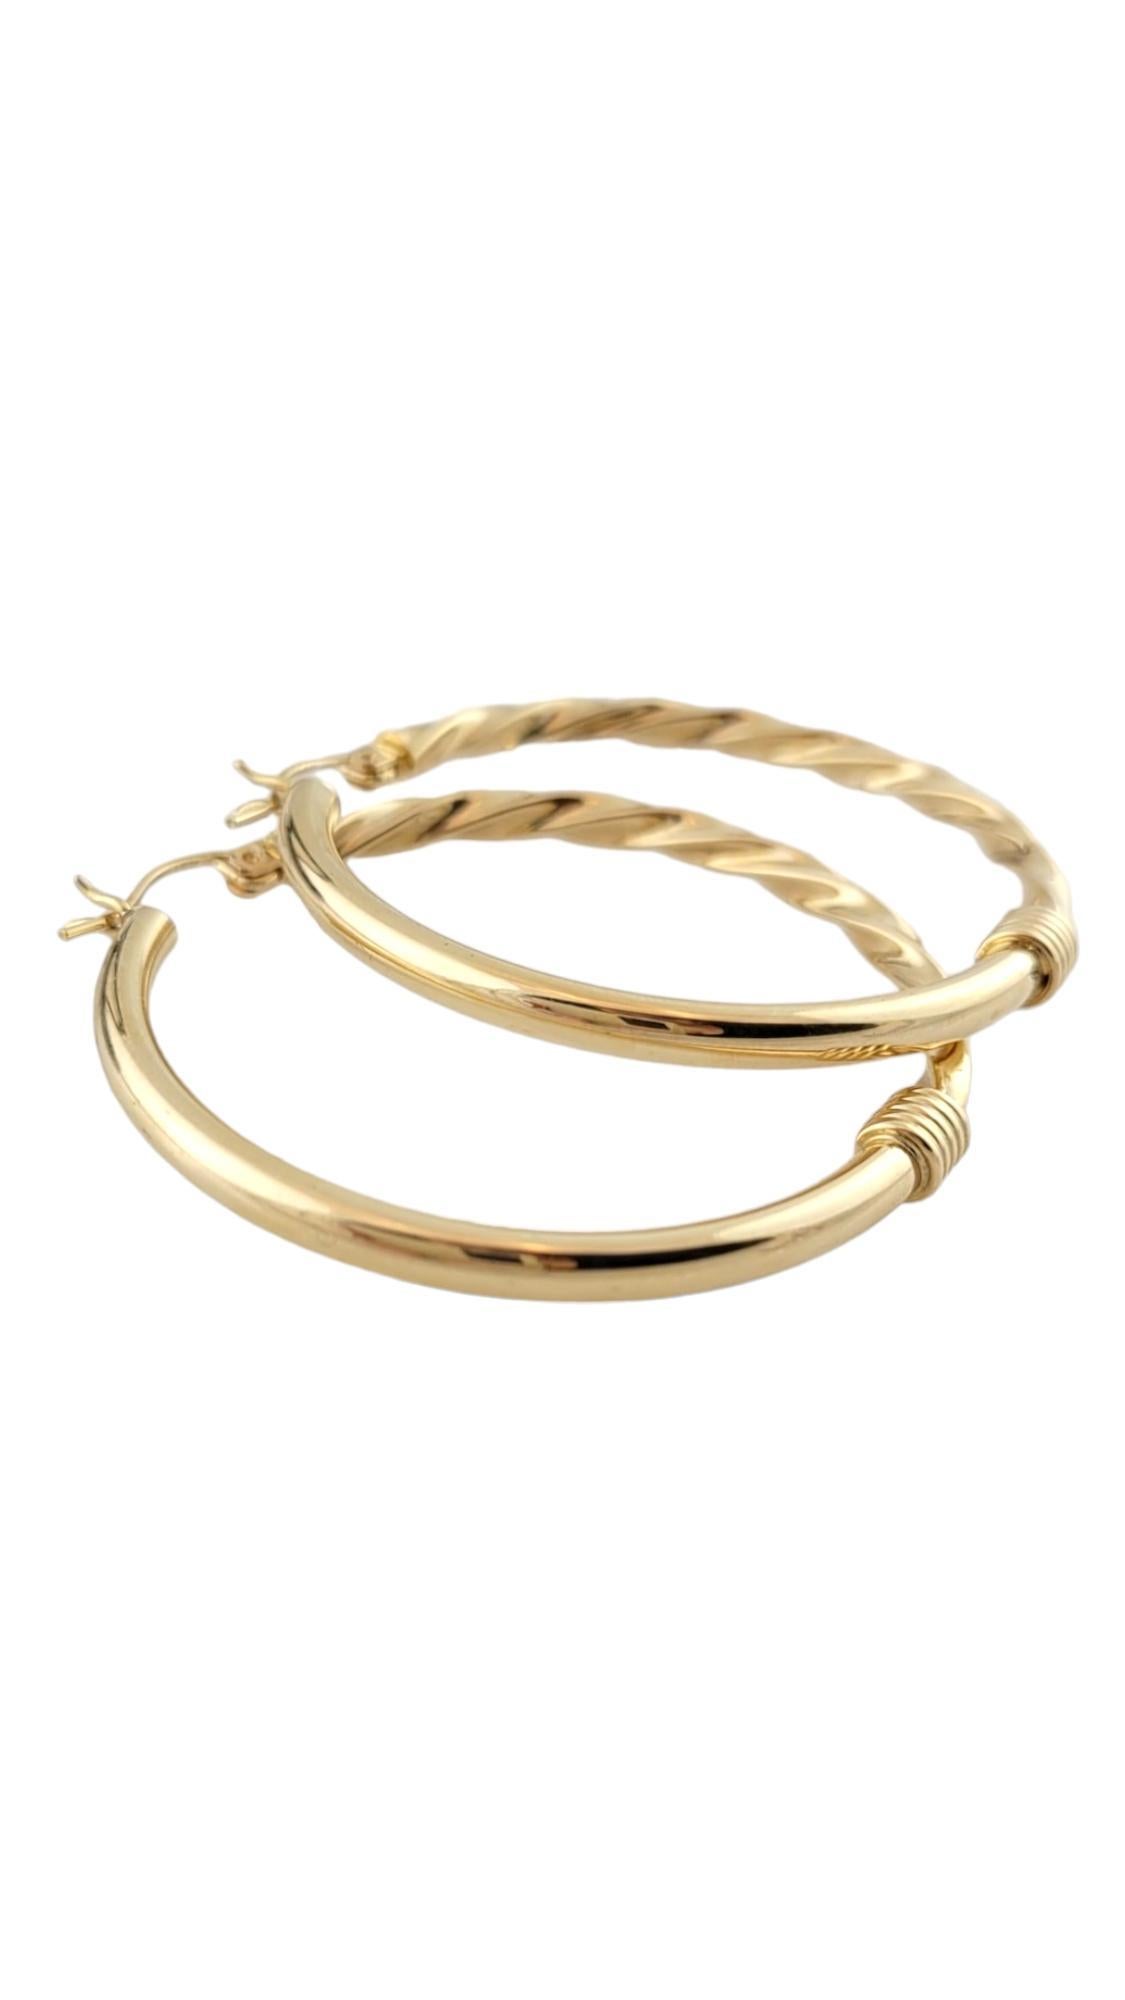 14K Yellow Gold Twisted/ Smooth Hoop Earrings #16139 In Good Condition For Sale In Washington Depot, CT